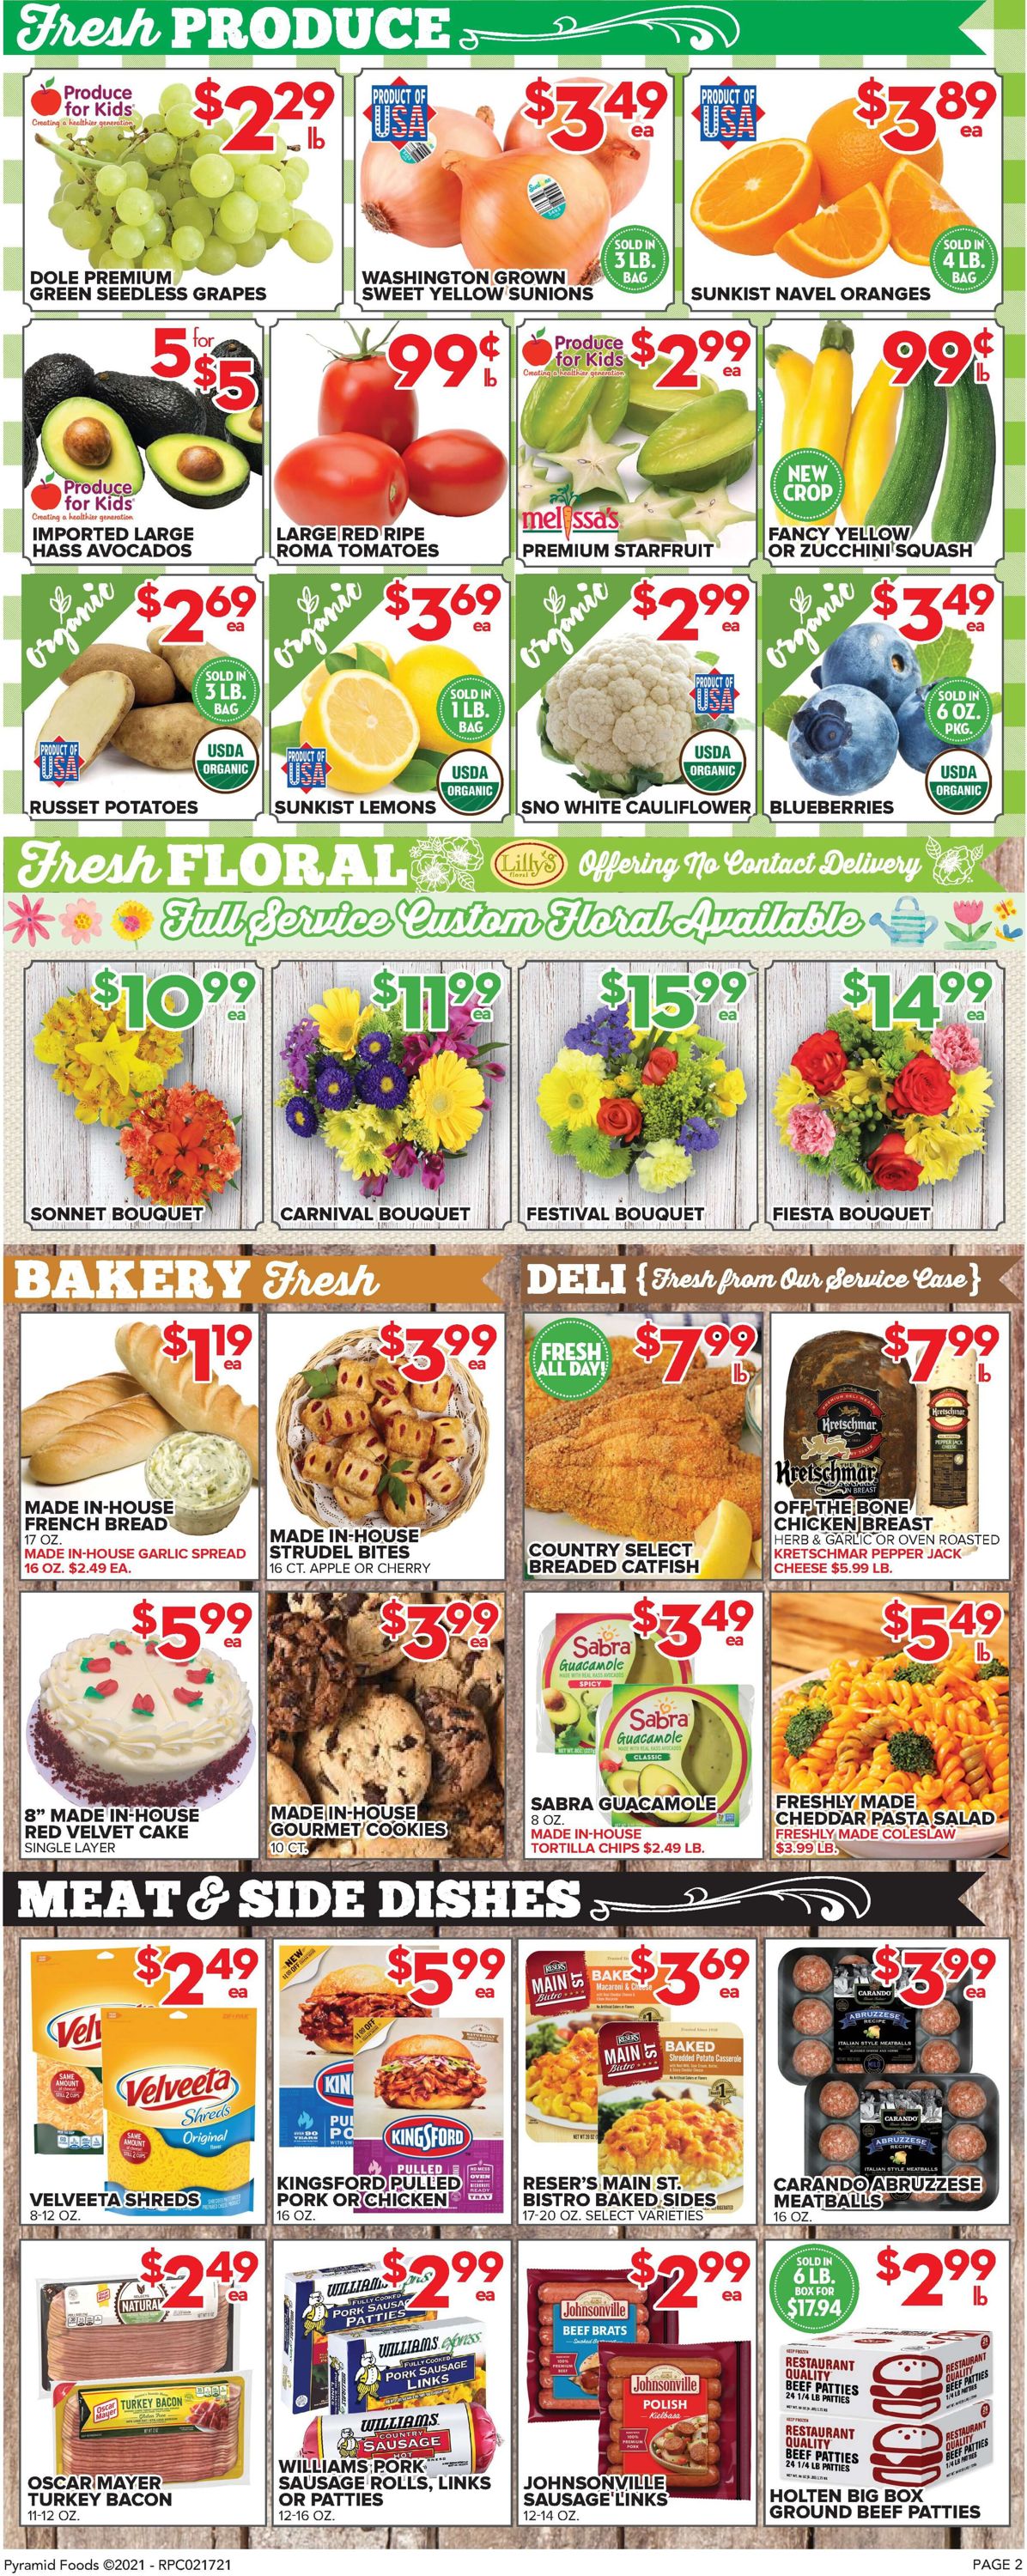 Price Cutter Weekly Ad Circular - valid 02/17-02/23/2021 (Page 2)